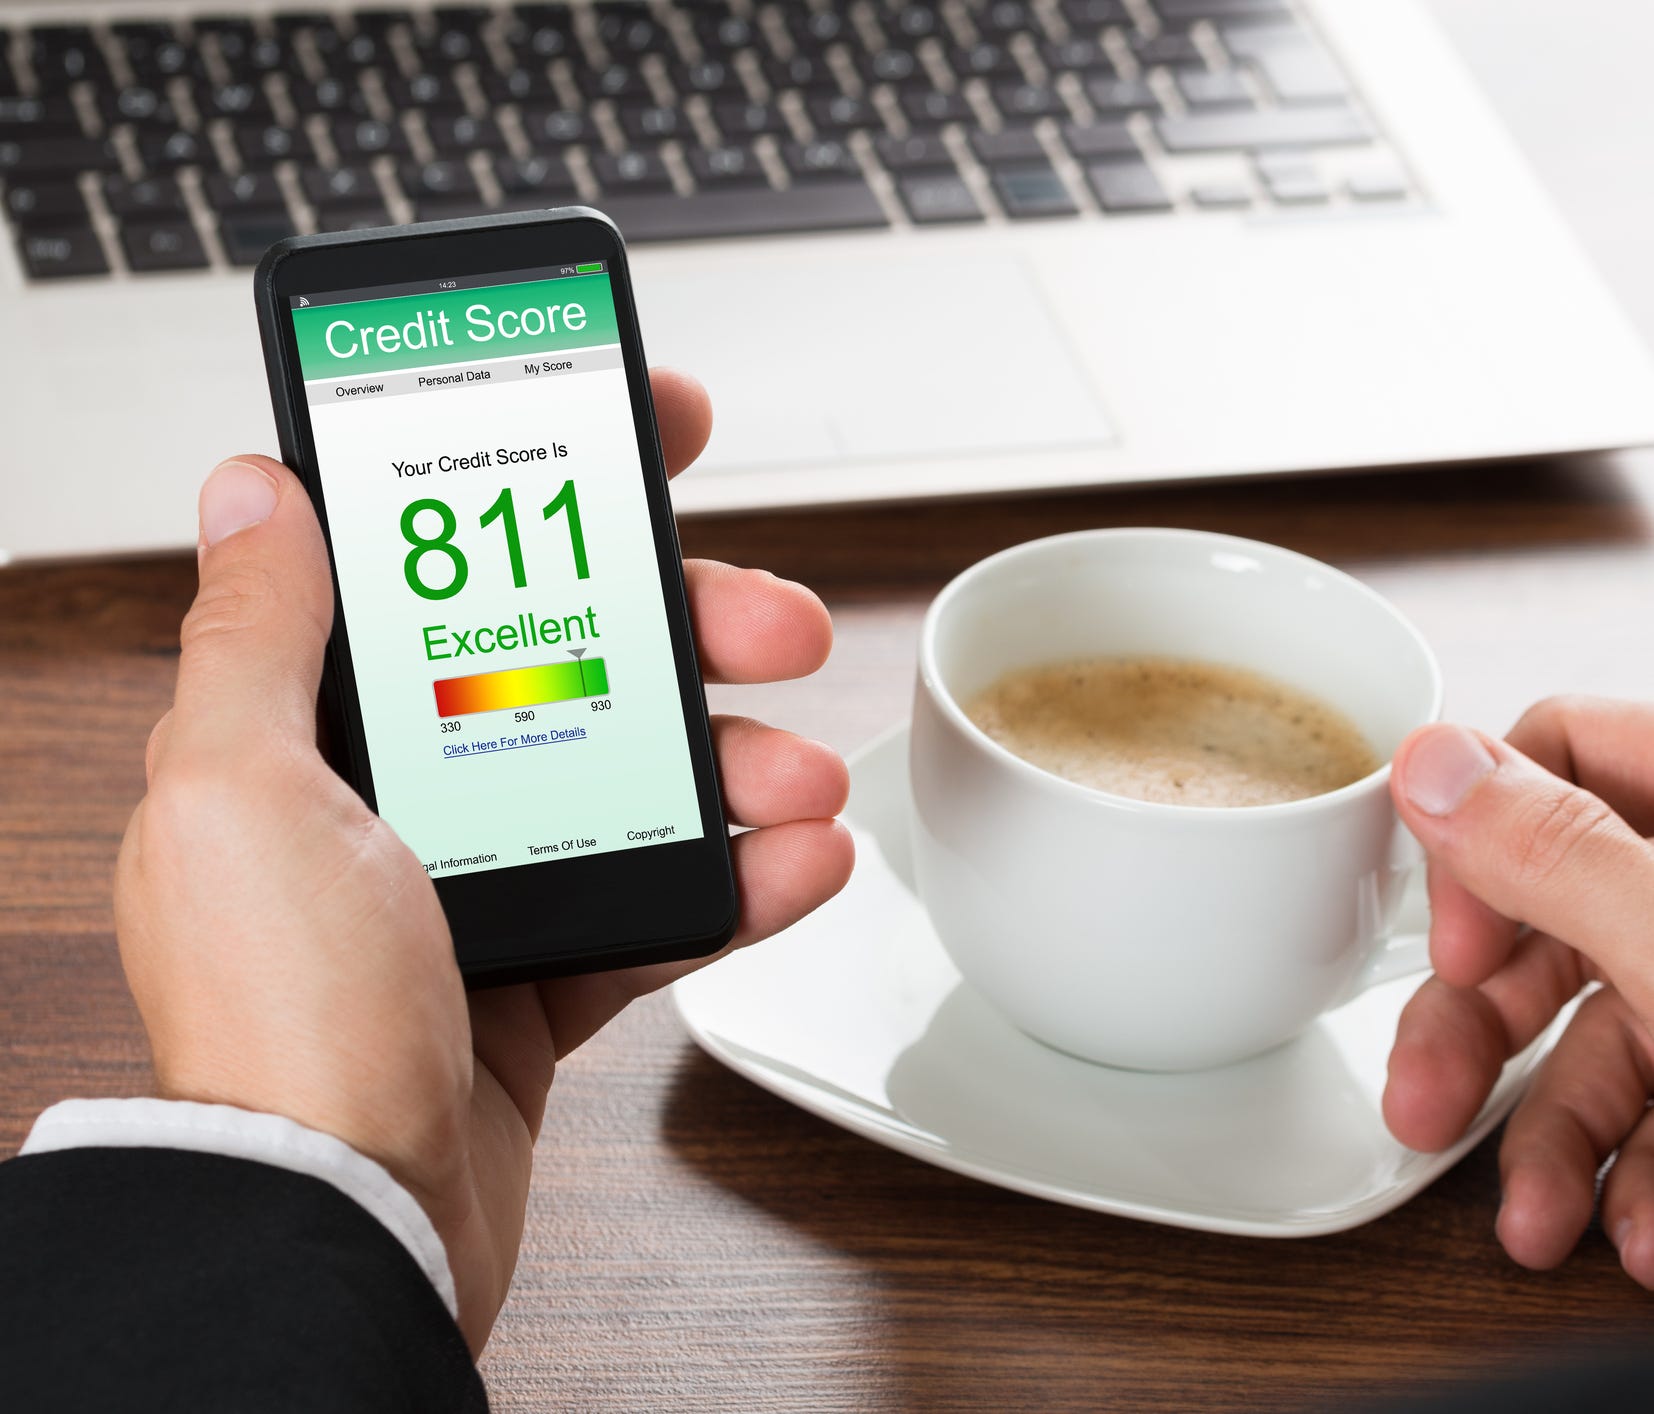 Consumers have more access to their credit scores than ever, allowing them to make informed financial decisions. But these scores can be confusing because there's no guarantee the score a consumer looks at is the same one a lender will use.